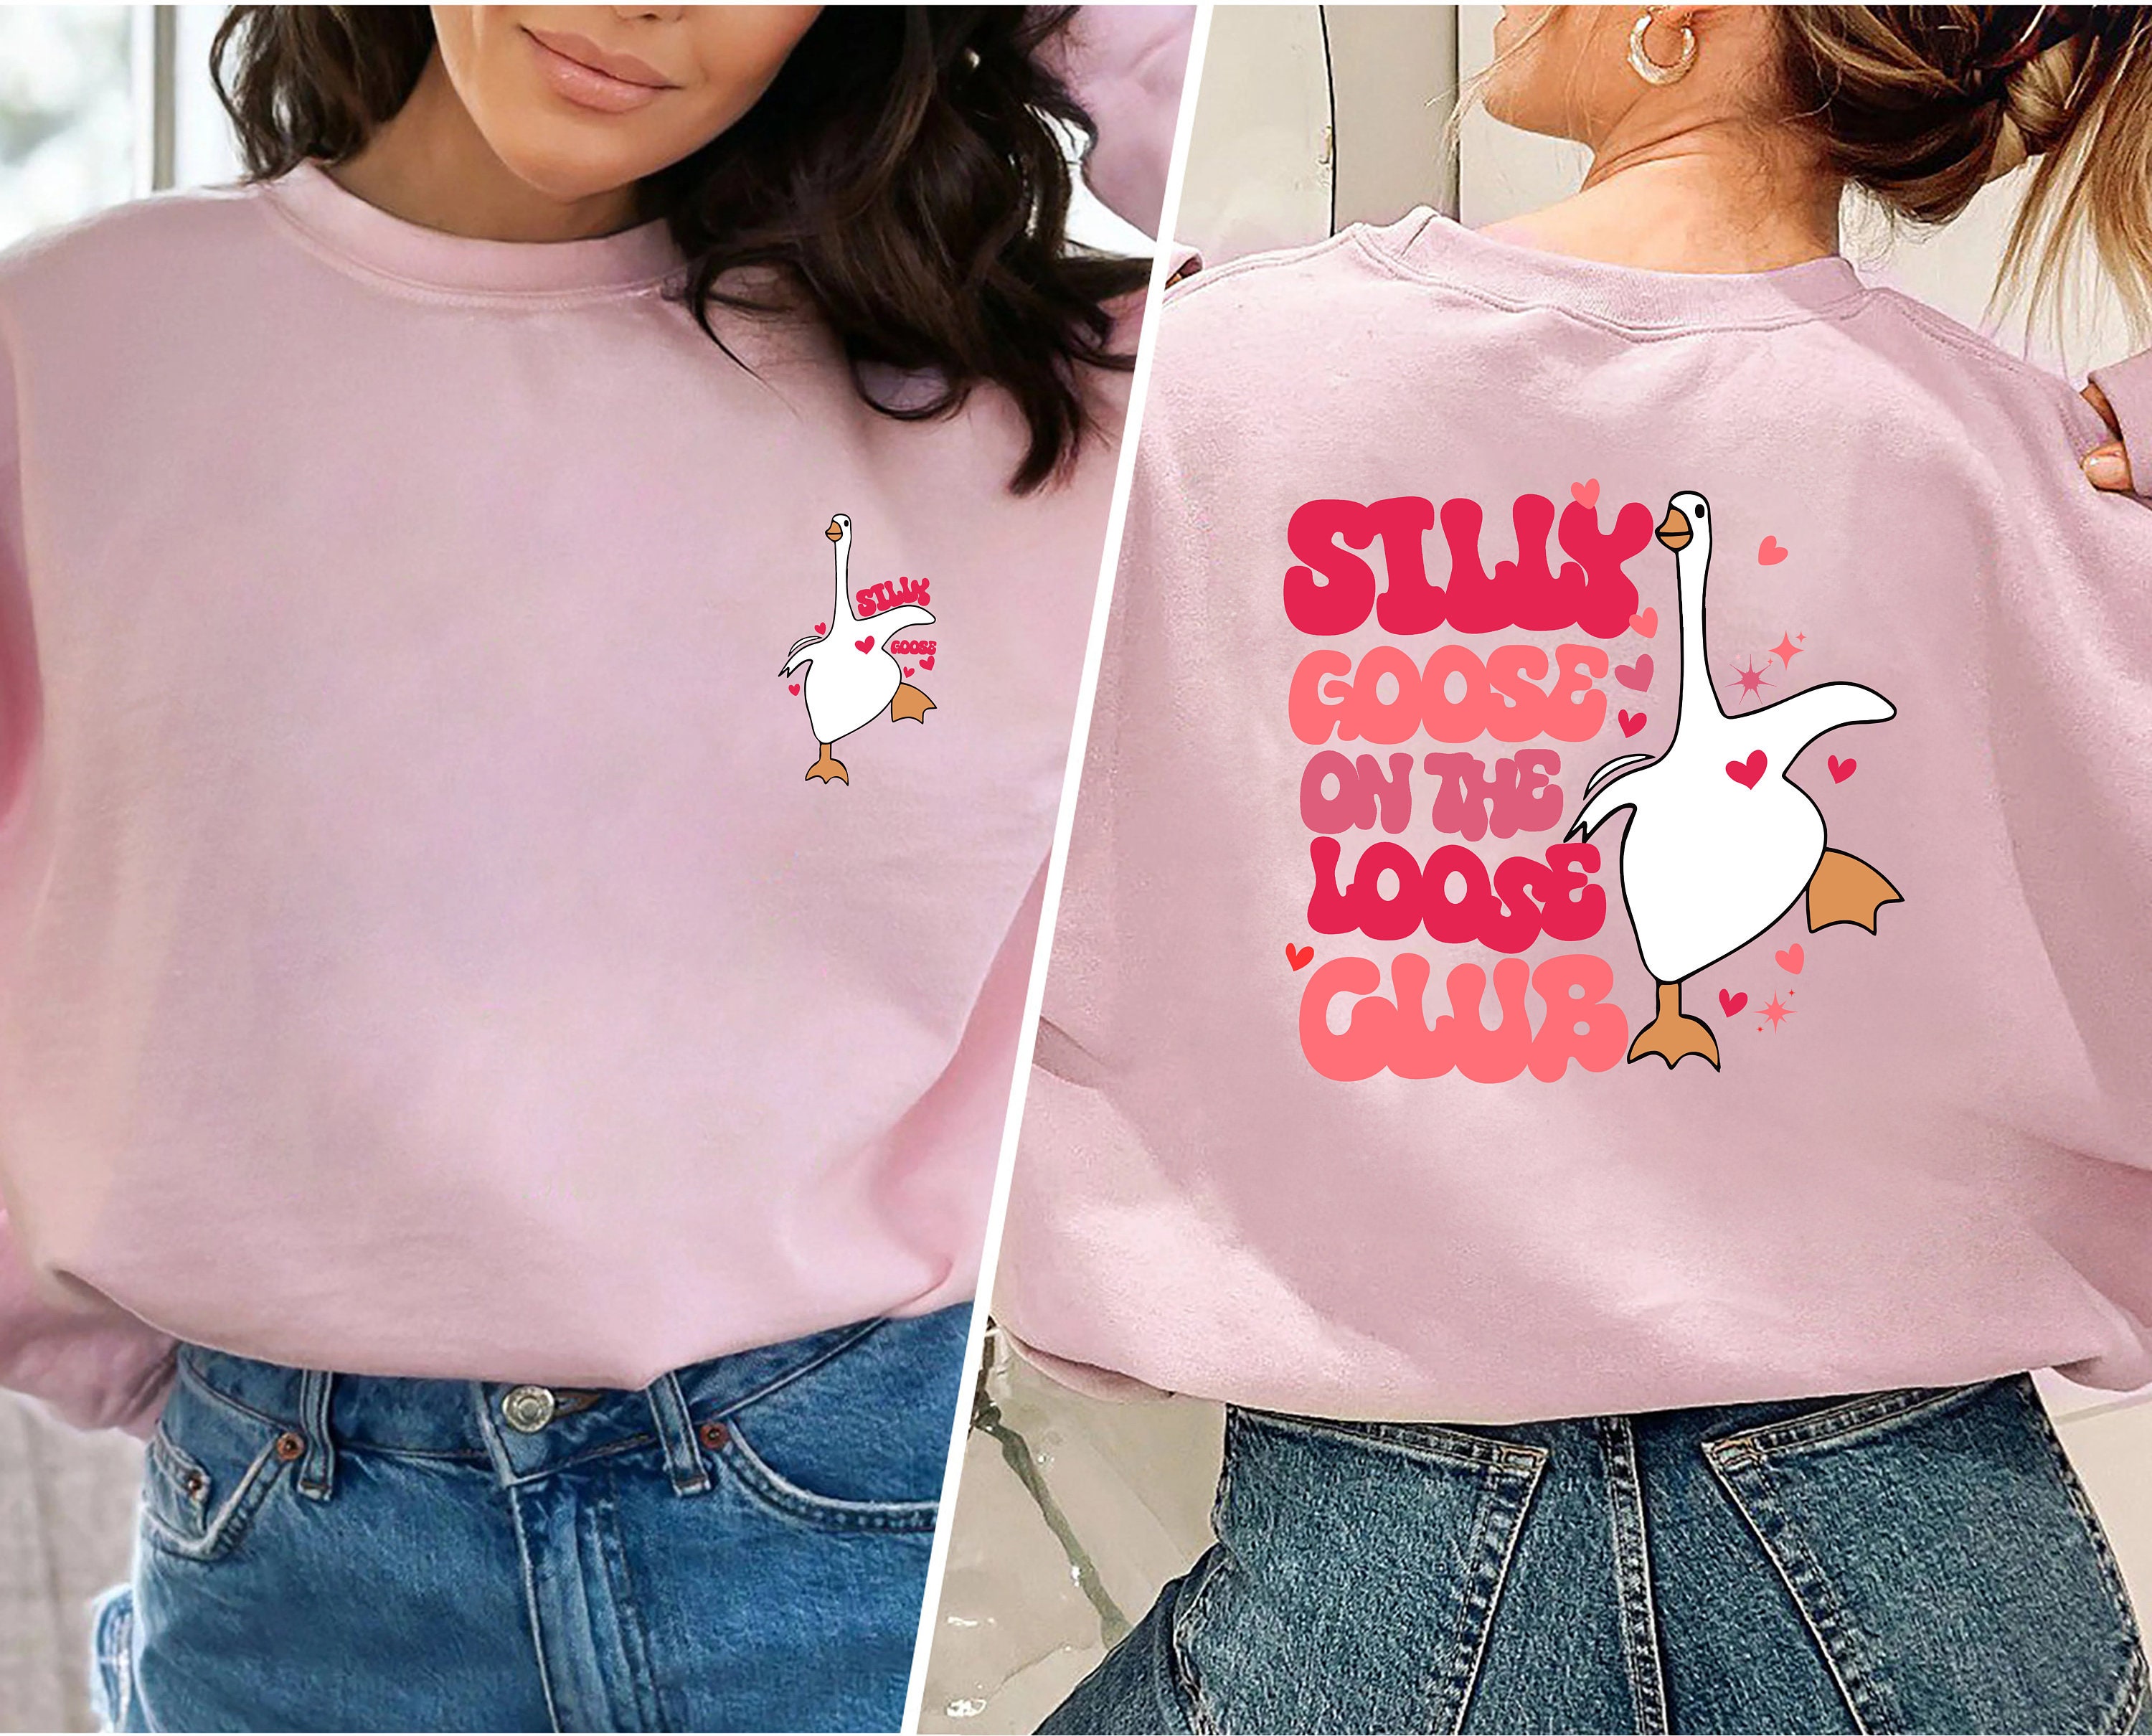 Silly Goose On the Loose Double Sided Sweatshirts